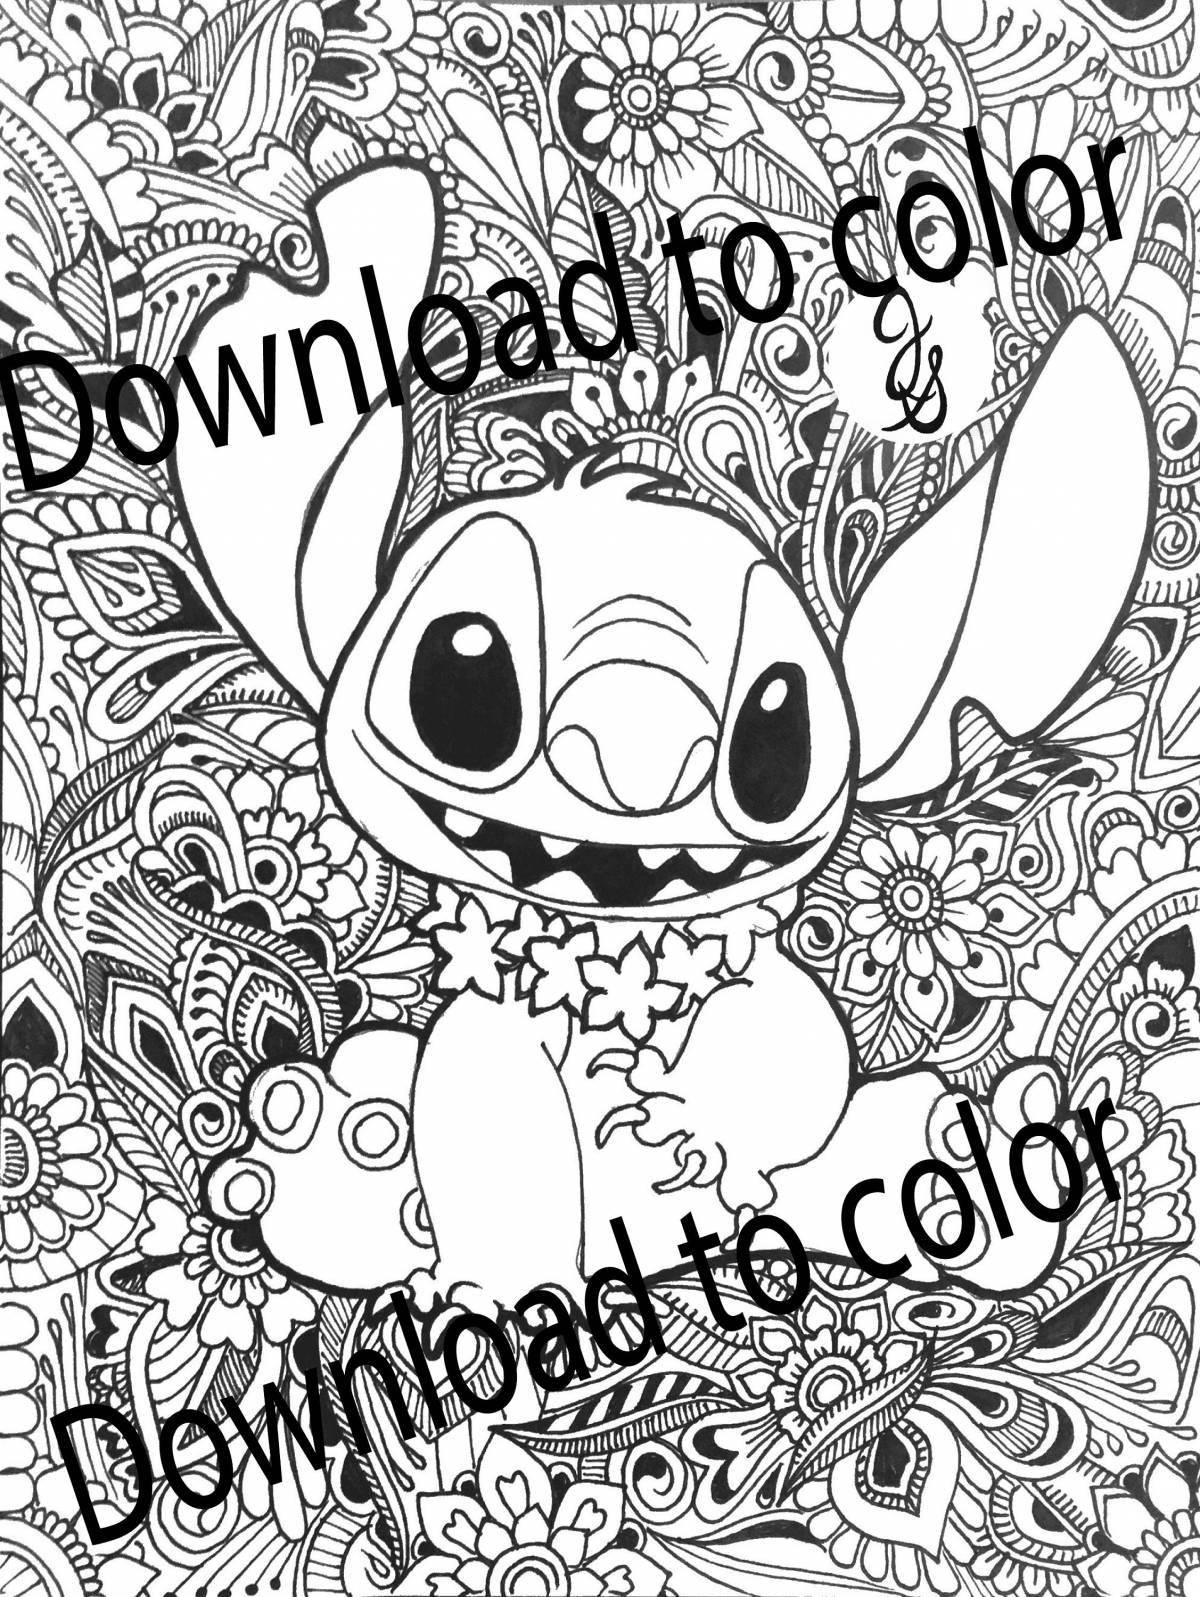 Color-explosive coloring page stitch by numbers